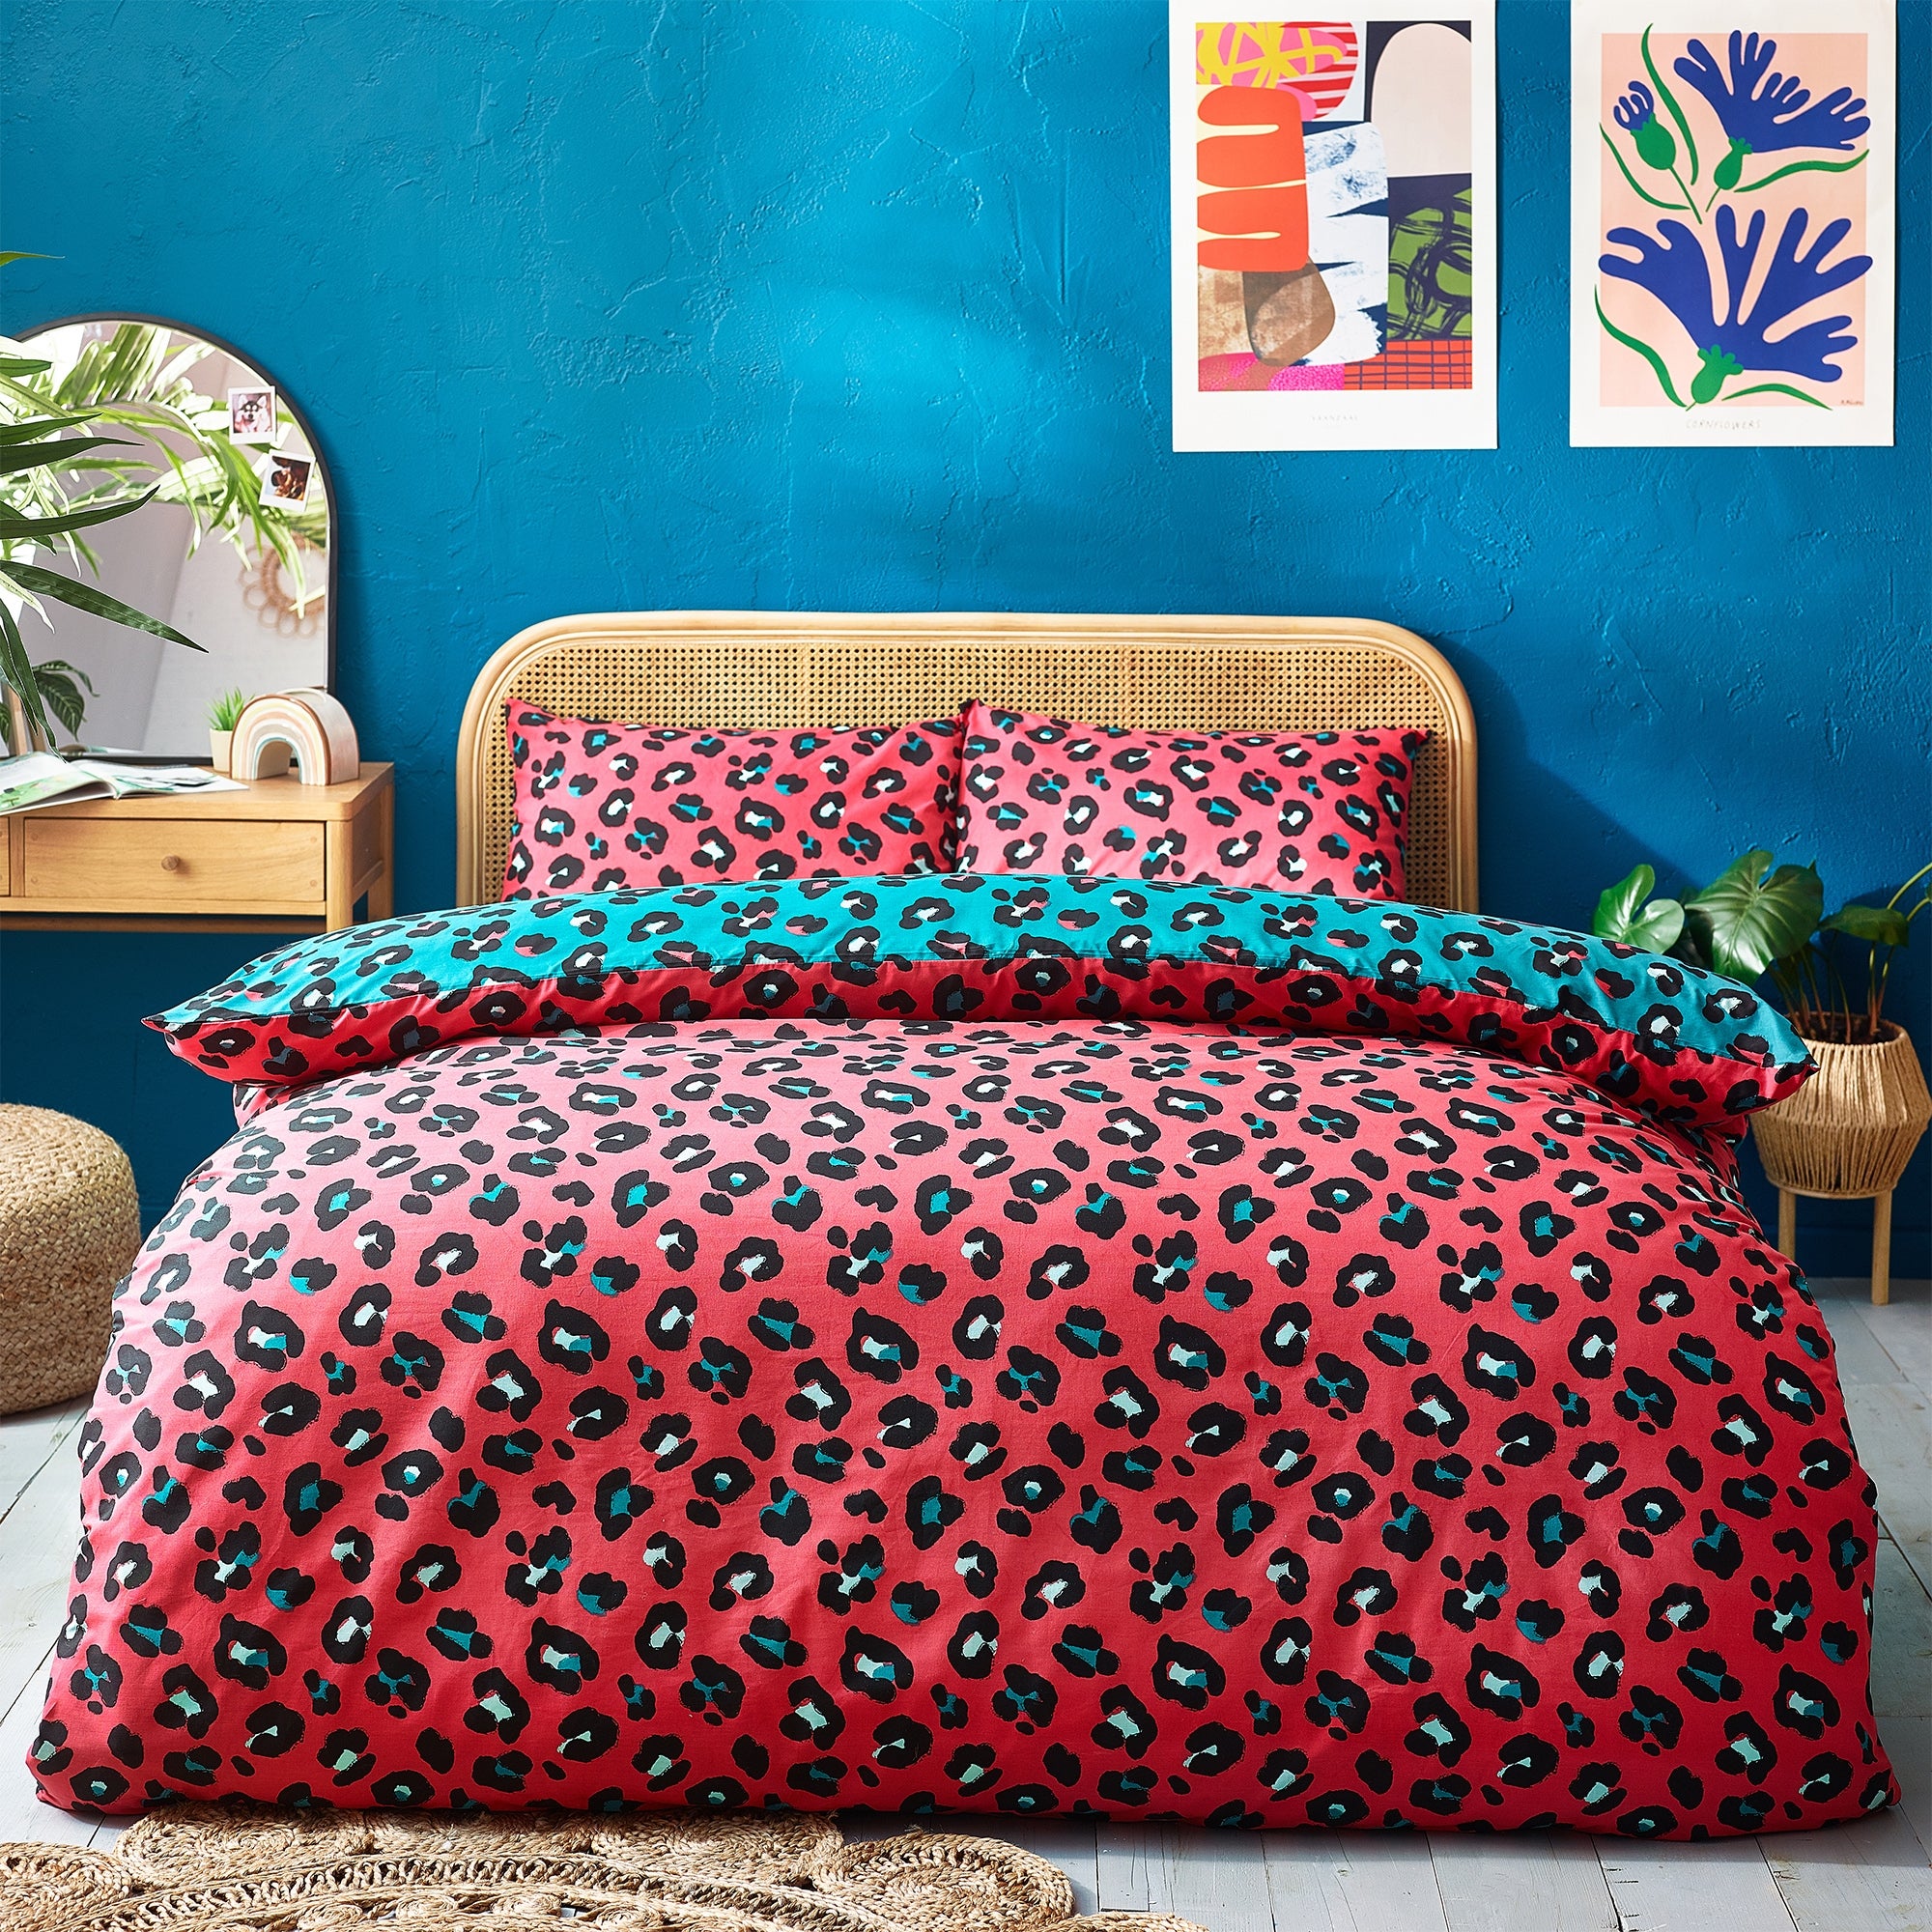 Style Lab Leopard Teal And Coral Duvet Cover And Pillowcase Set Teal Green